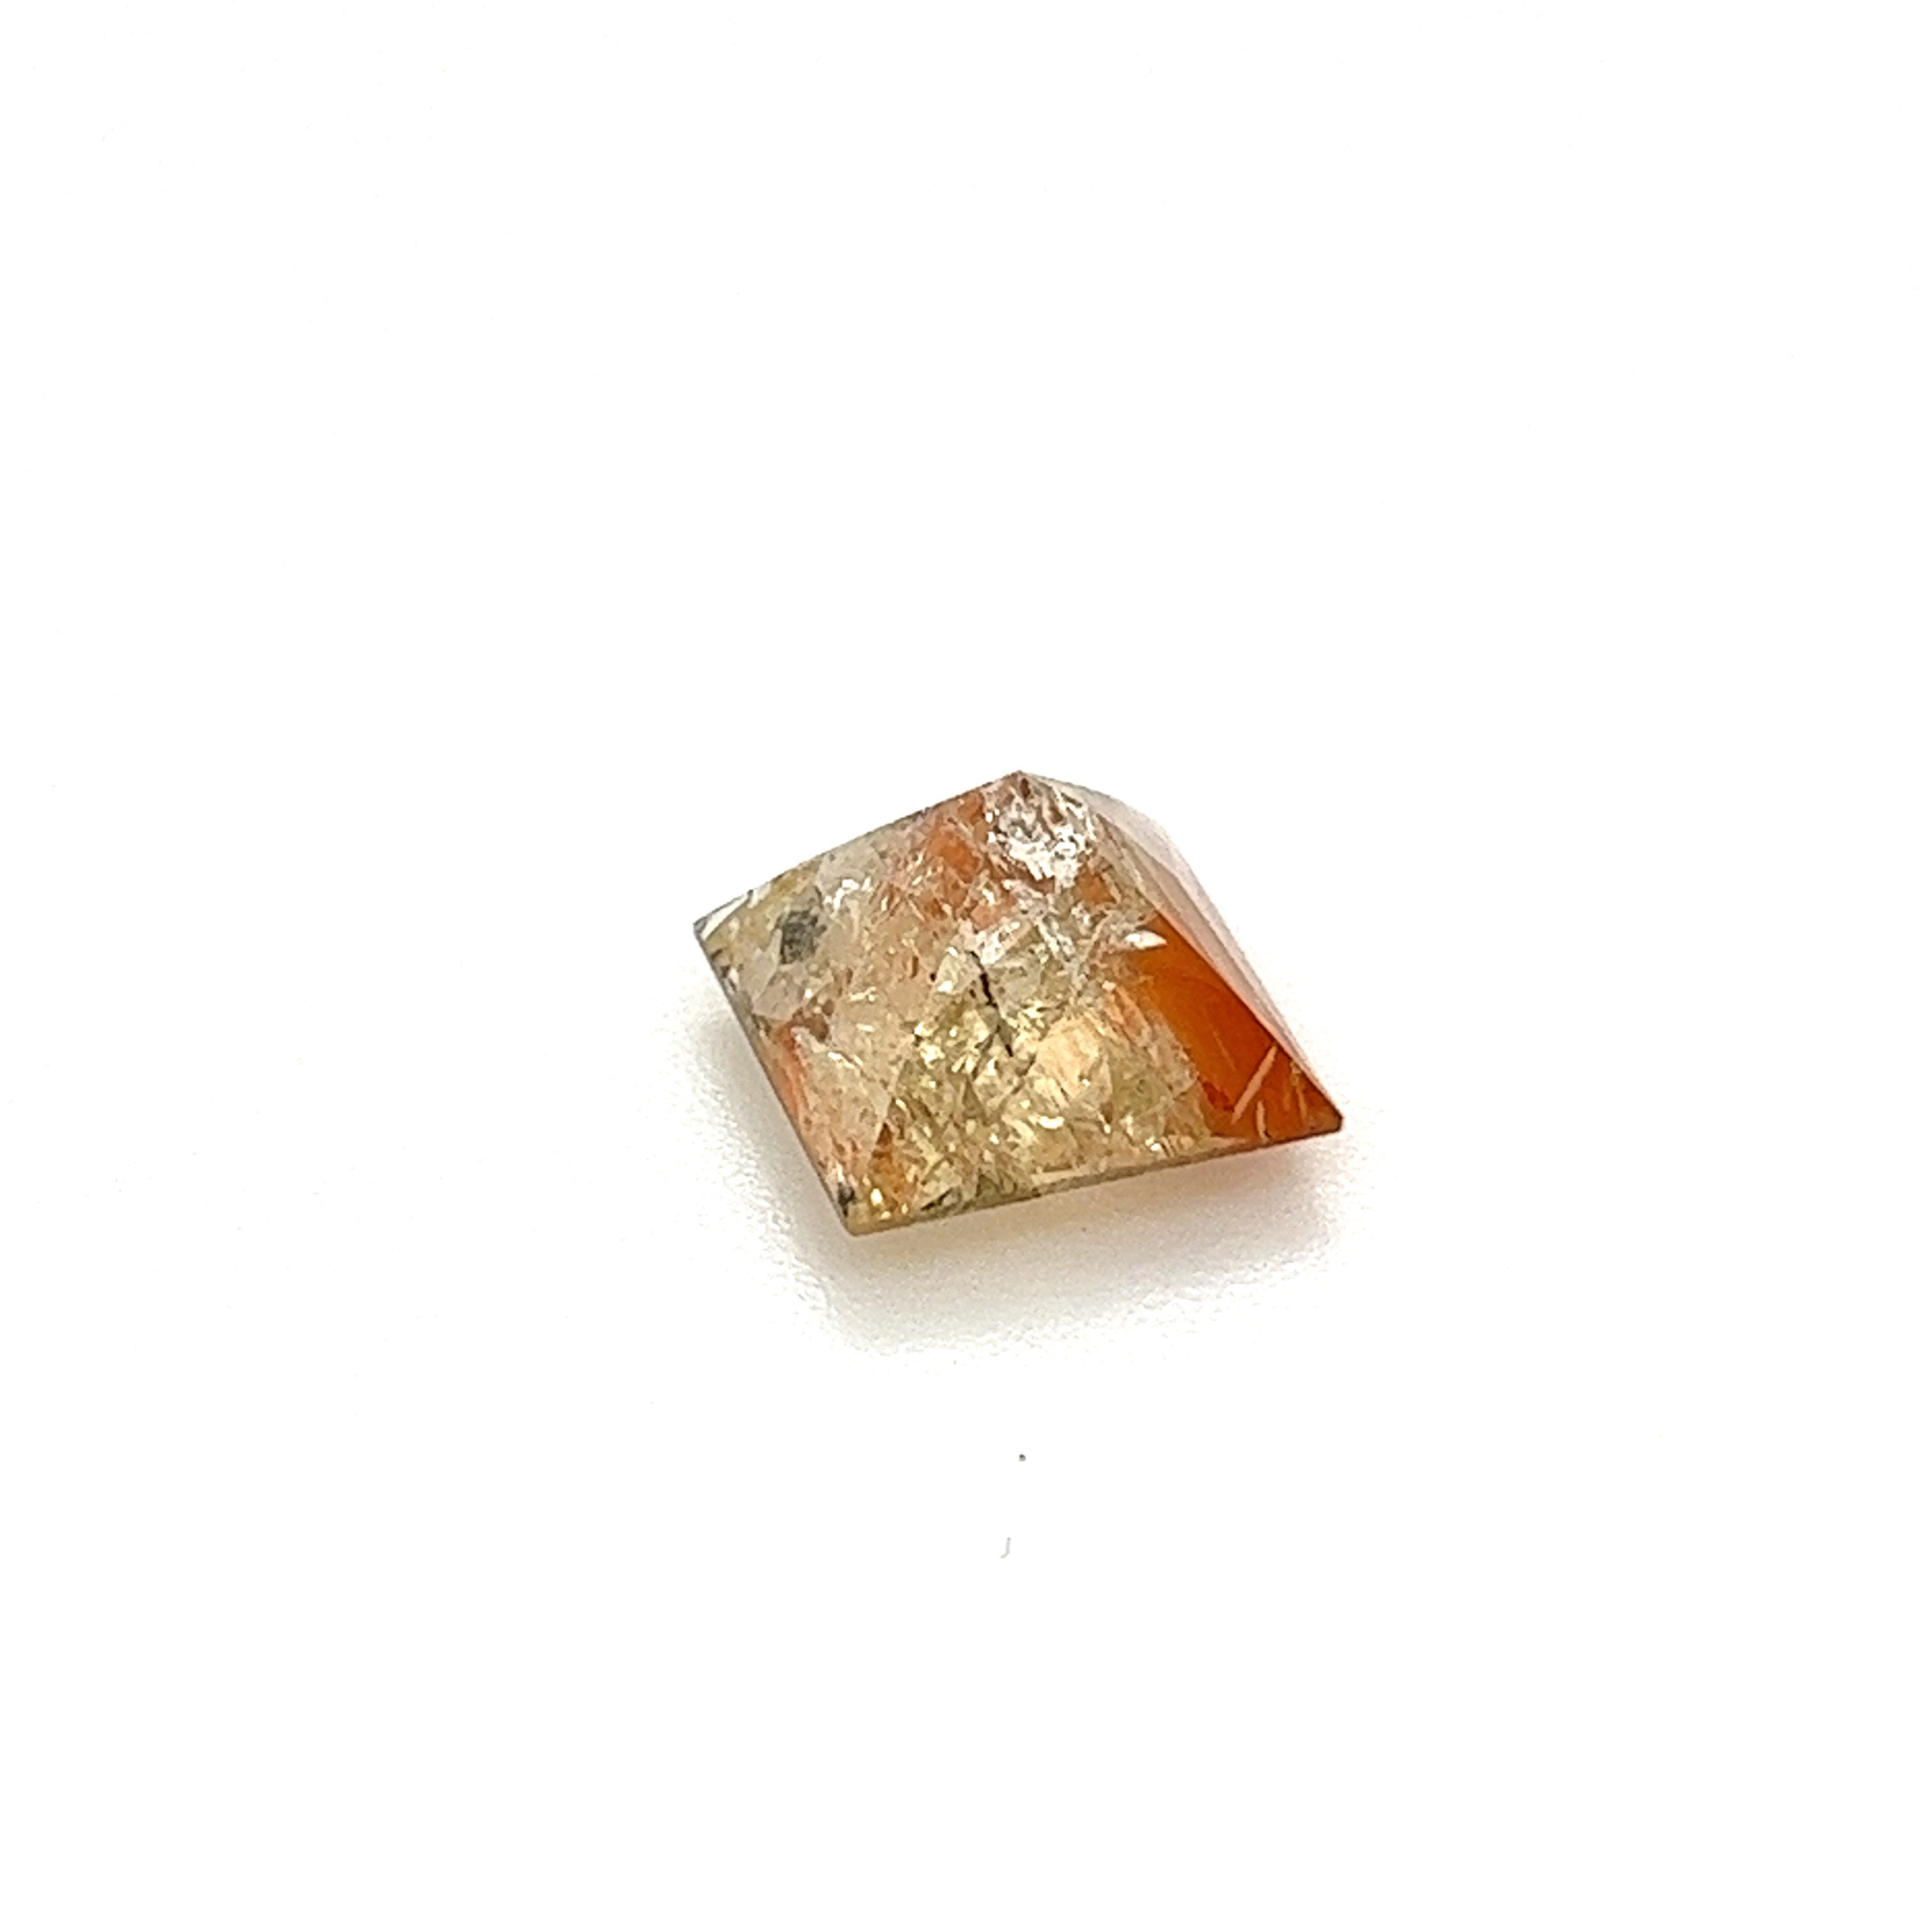 Scapolite Gemstone; Natural Untreated Tanzanian Copper Scapolite, 3.225cts - Mark Oliver Gems